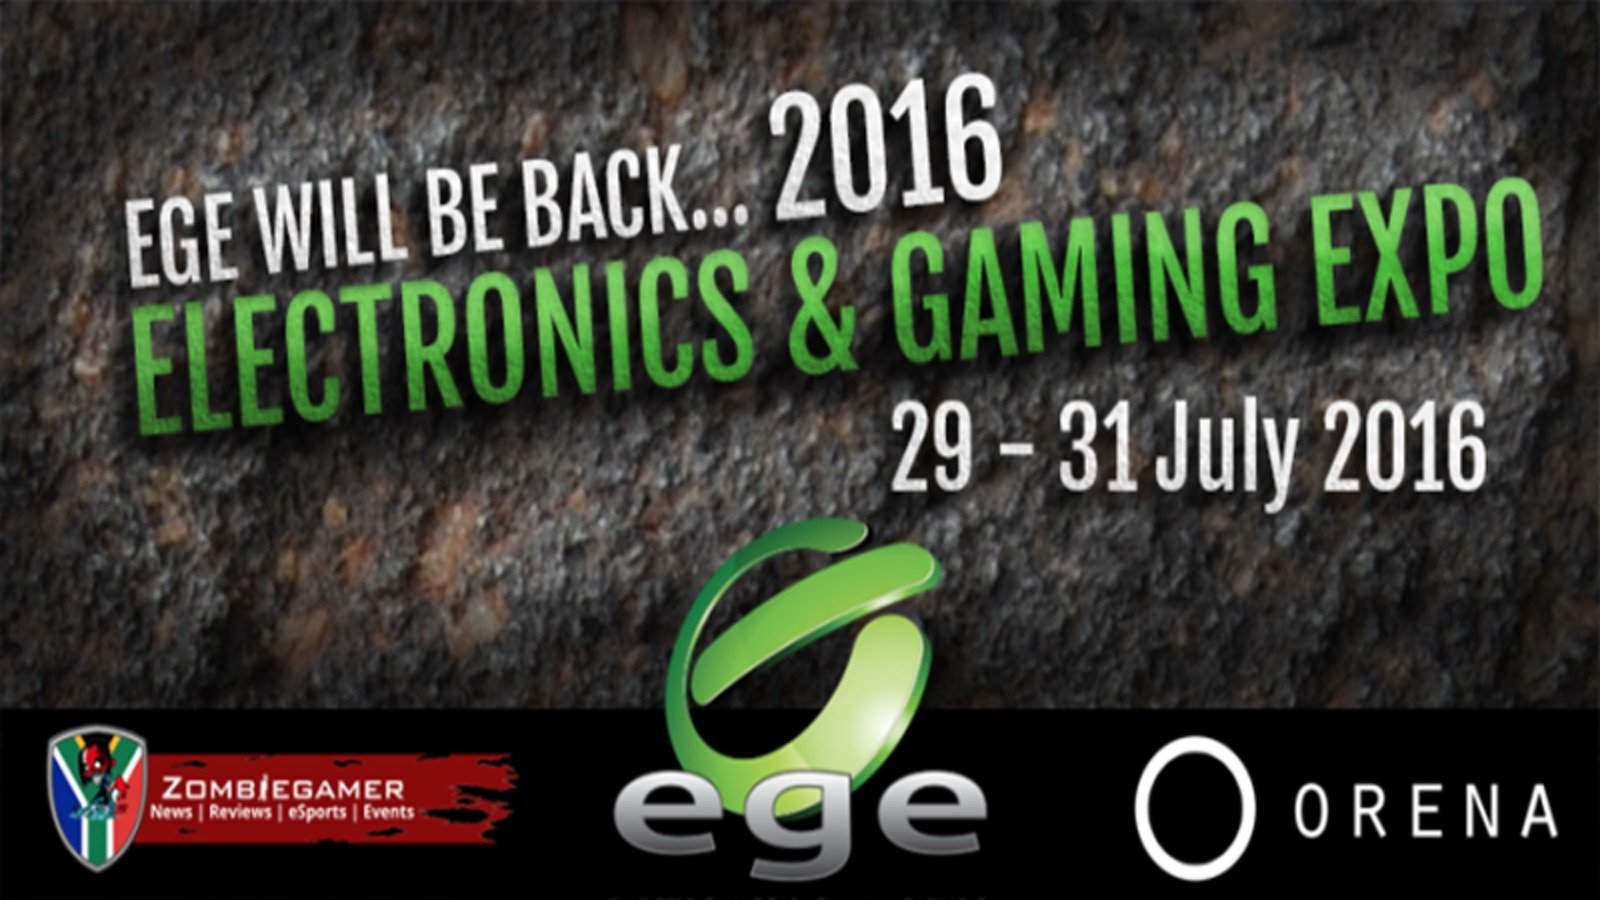 Vamers - FYI - Gaming - Events - Cape Town's Electronic Gaming Expo (EGE) is back - Banner Main